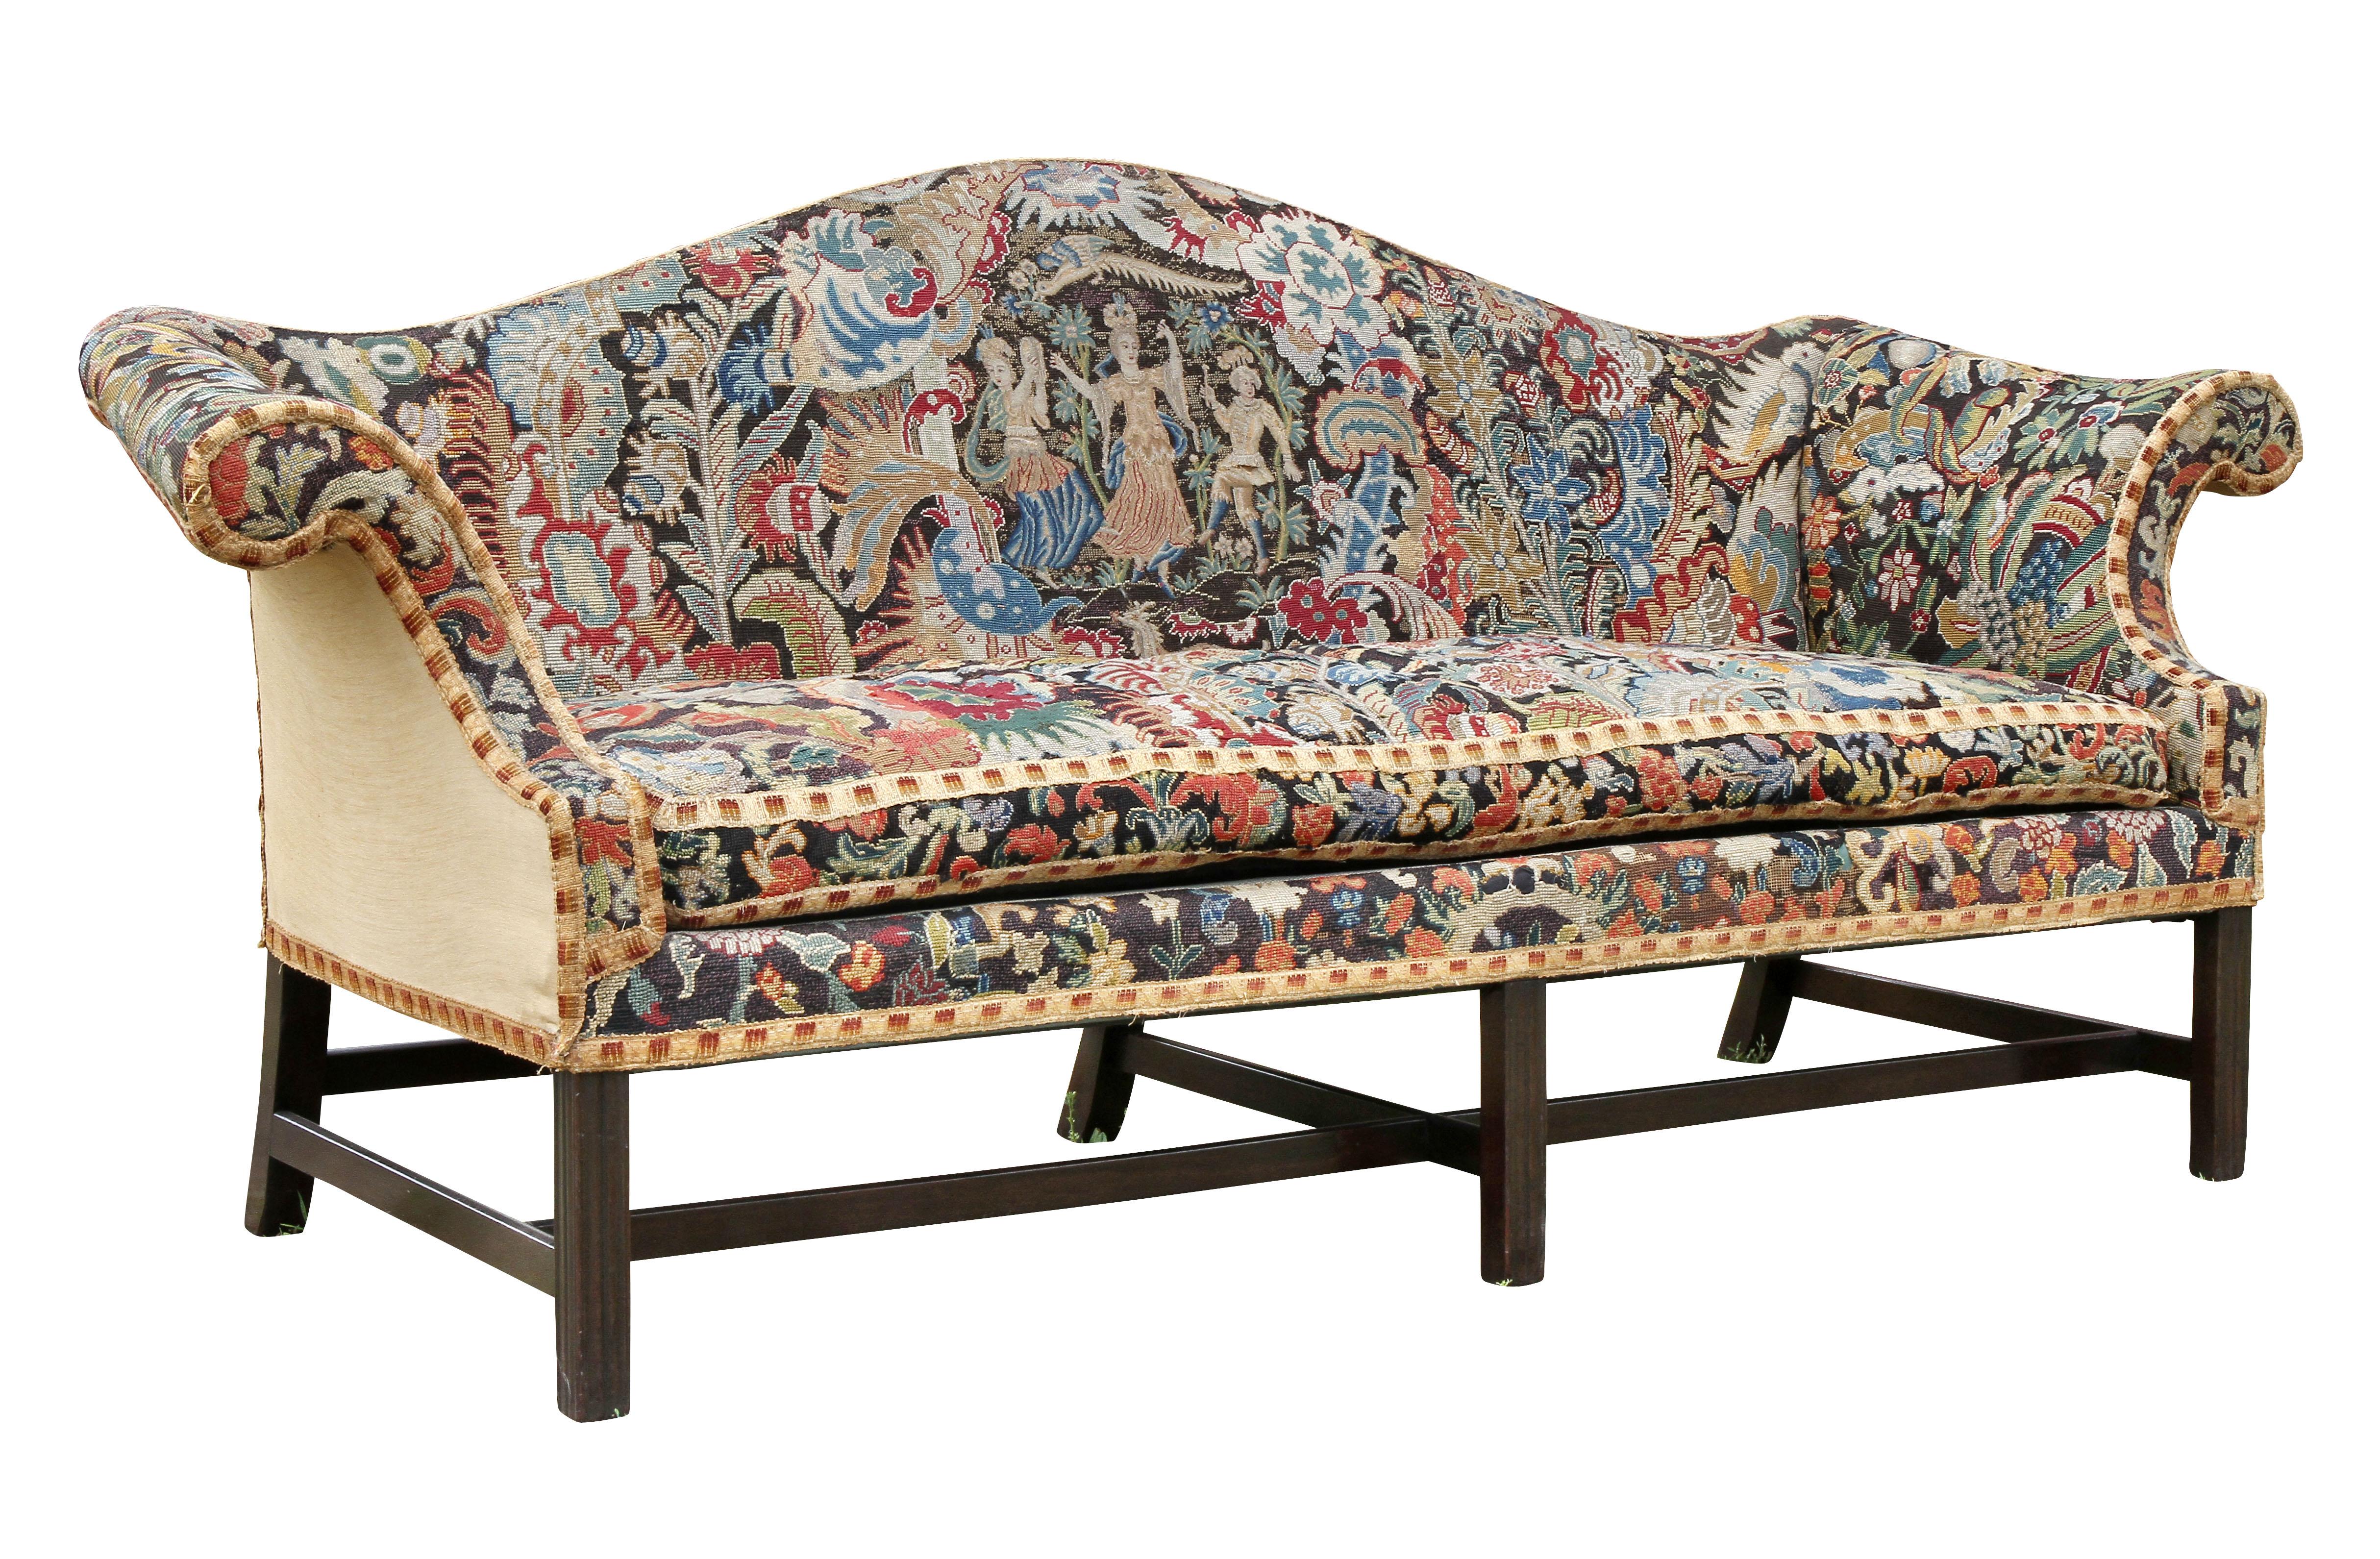 With a serpentine shaped back and straight seat with loose cushion, out scrolled arms, raised on square section legs with stretchers. A Classic form with colorful hand done needlepoint and petit point.